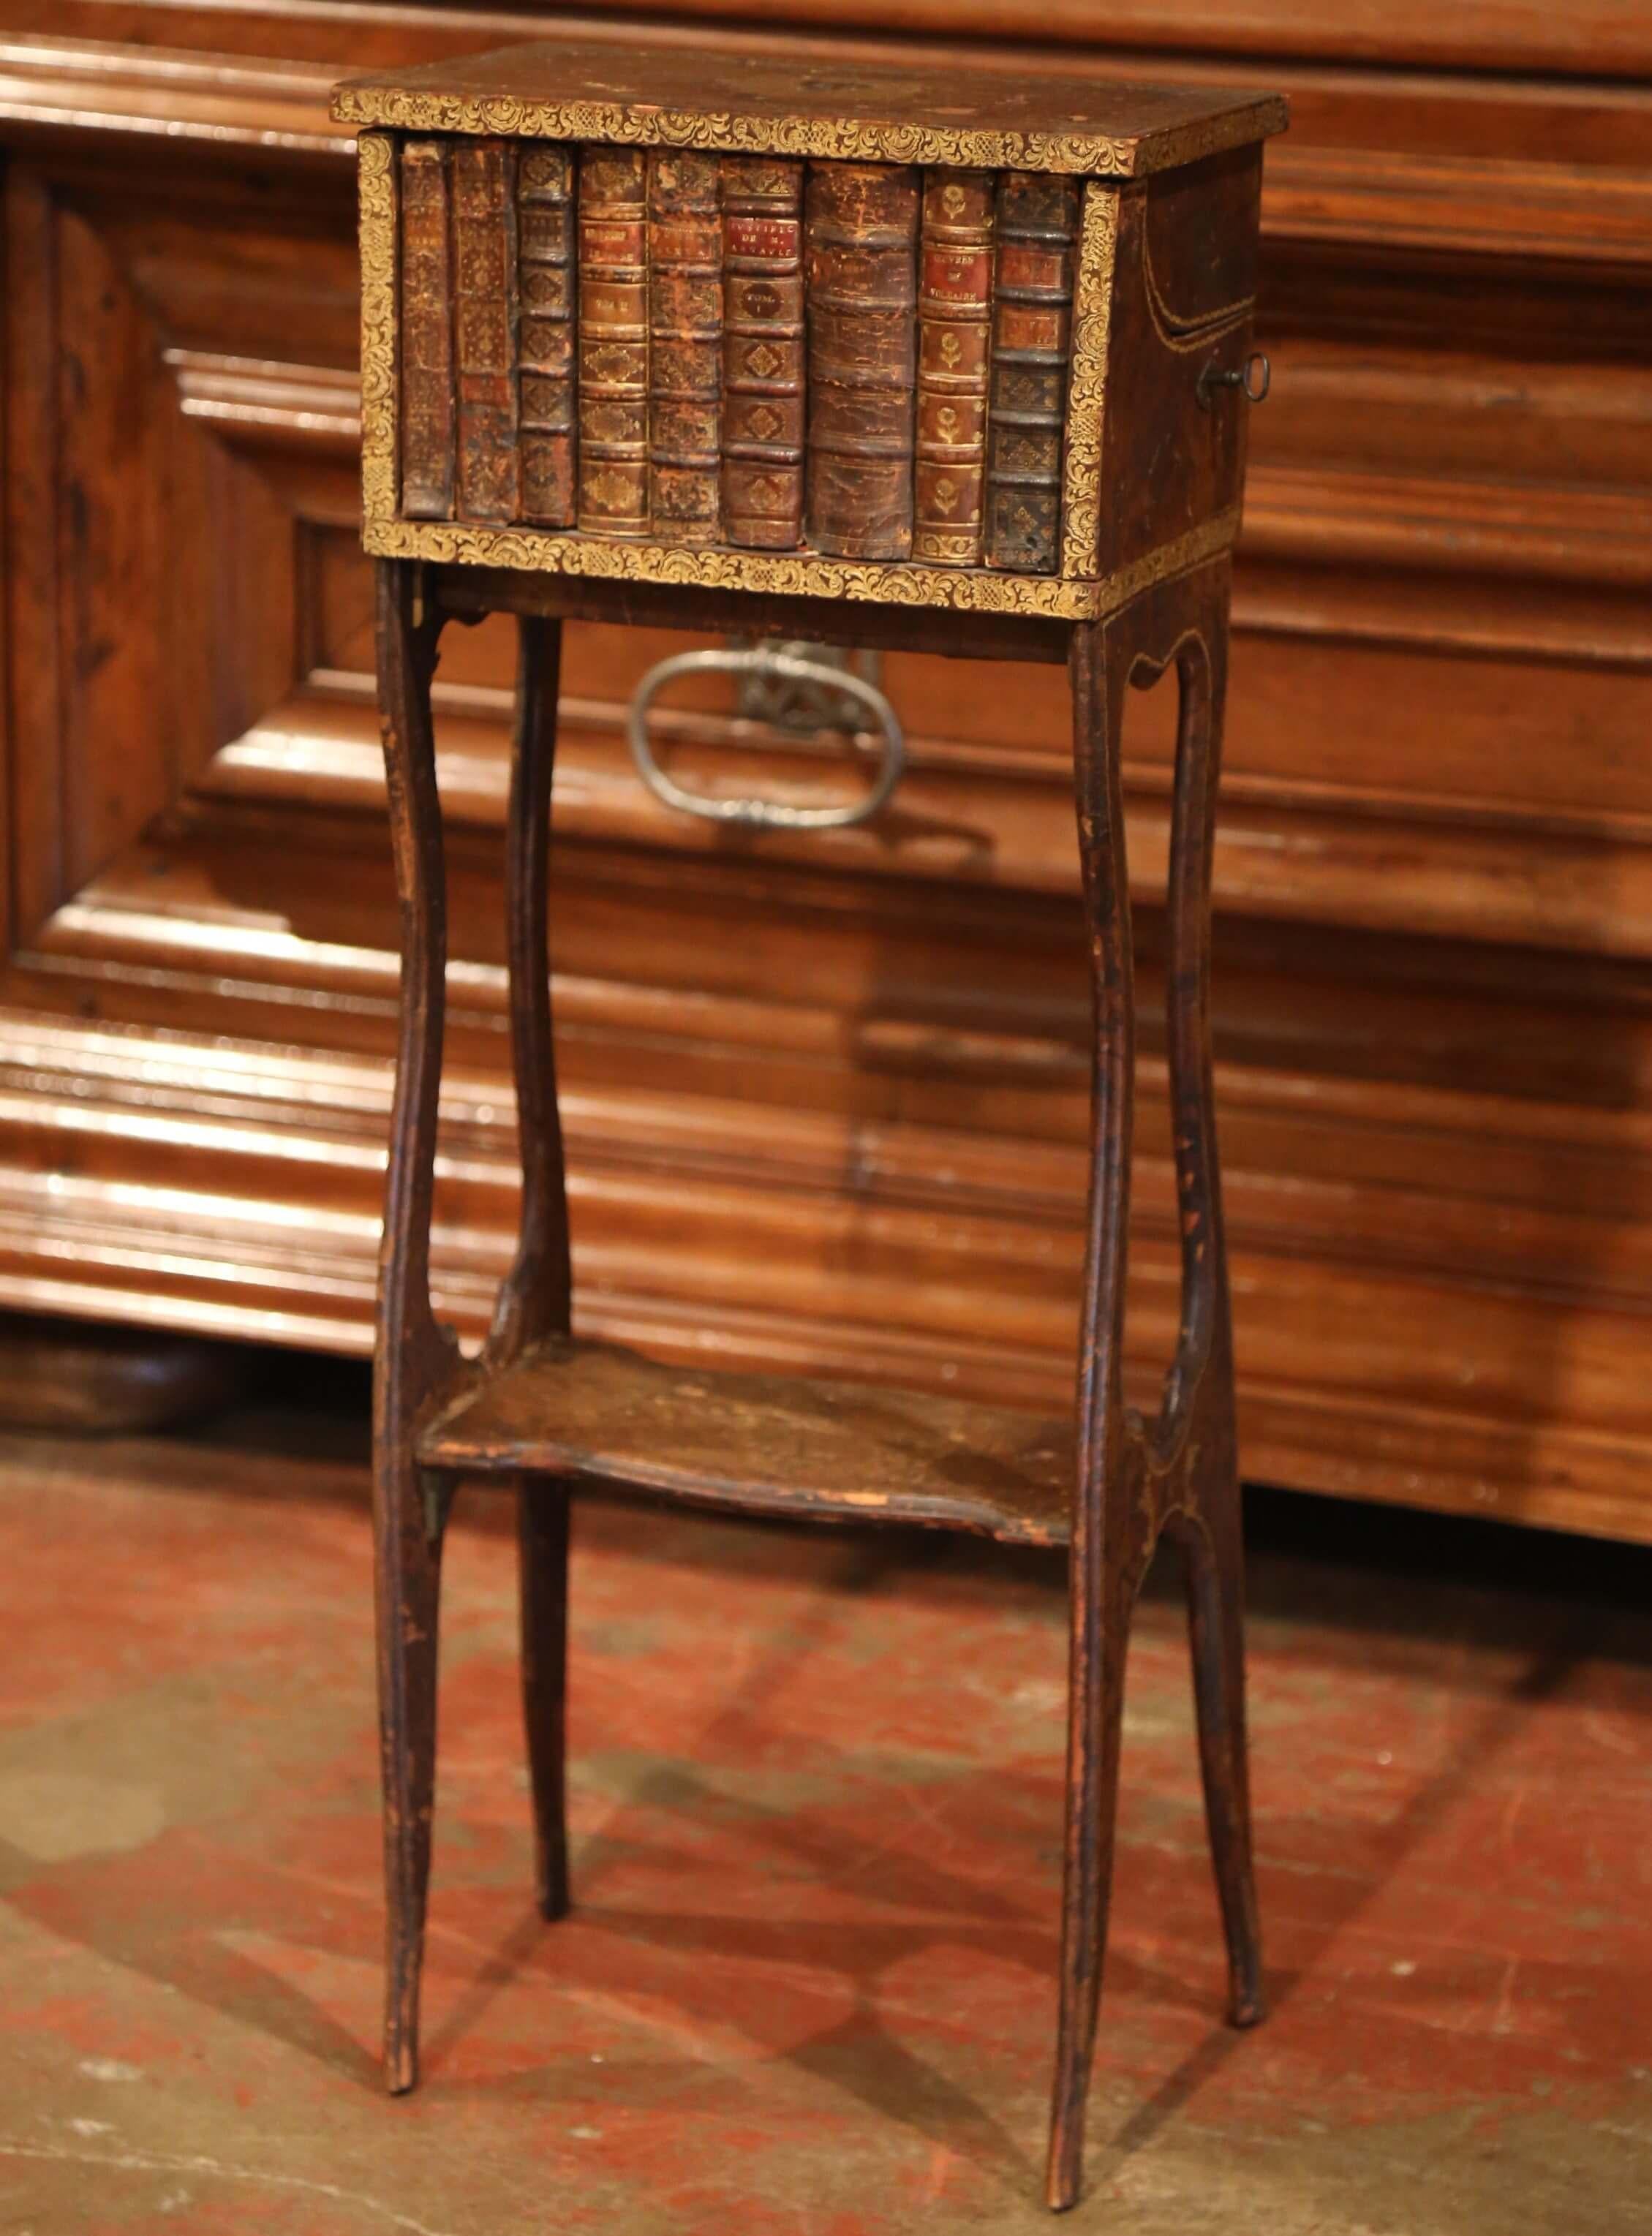 Early 19th Century French Faux Leather Bound Books Liquor Cabinet with Glasses For Sale 2